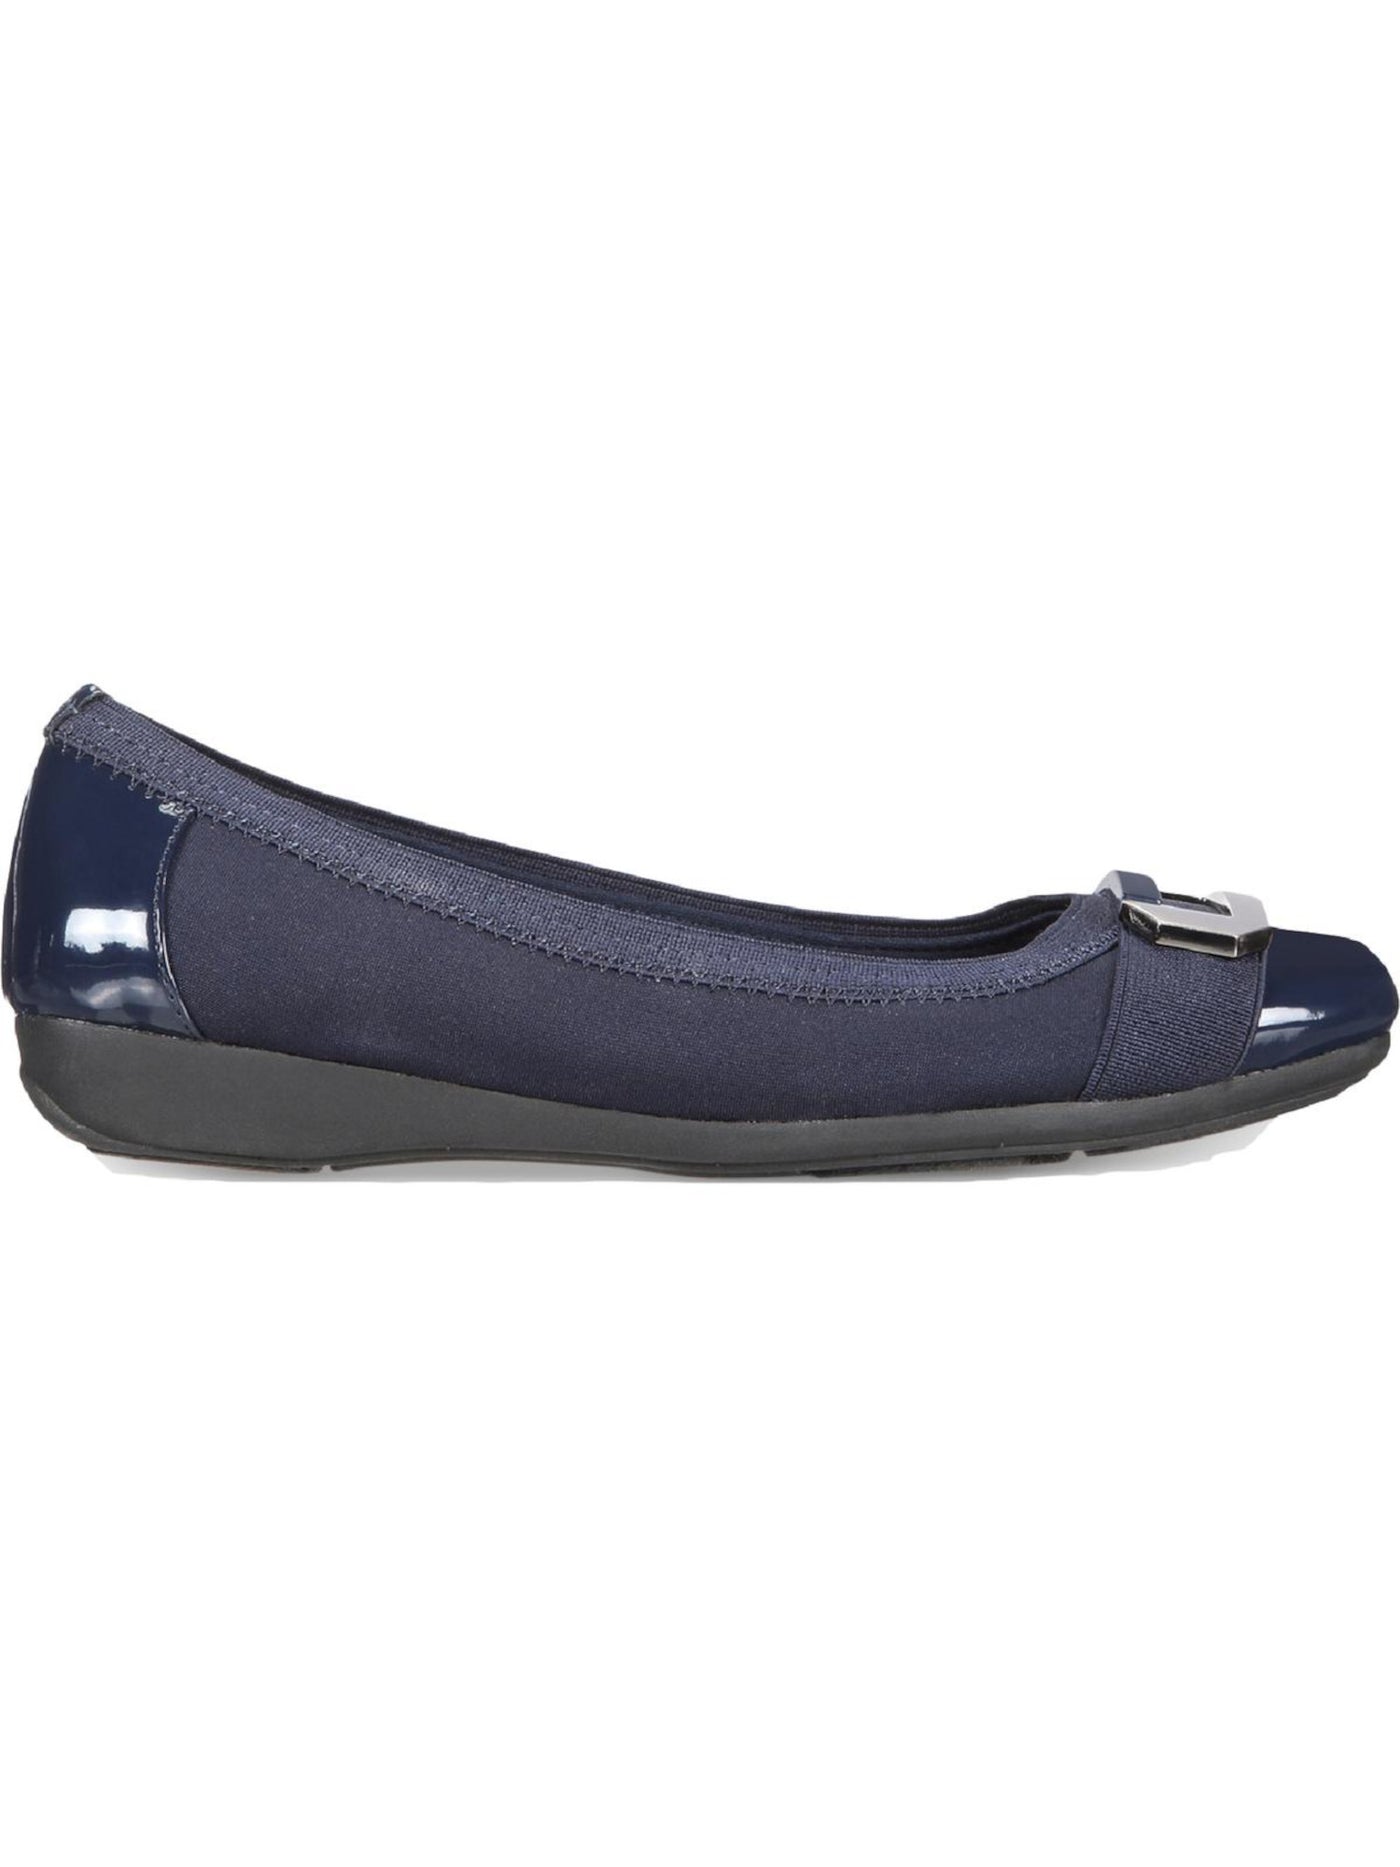 AK SPORT Womens Navy Stretch Lightweight Buckle Accent Cushioned Uplift Square Toe Wedge Slip On Flats Shoes 6 M